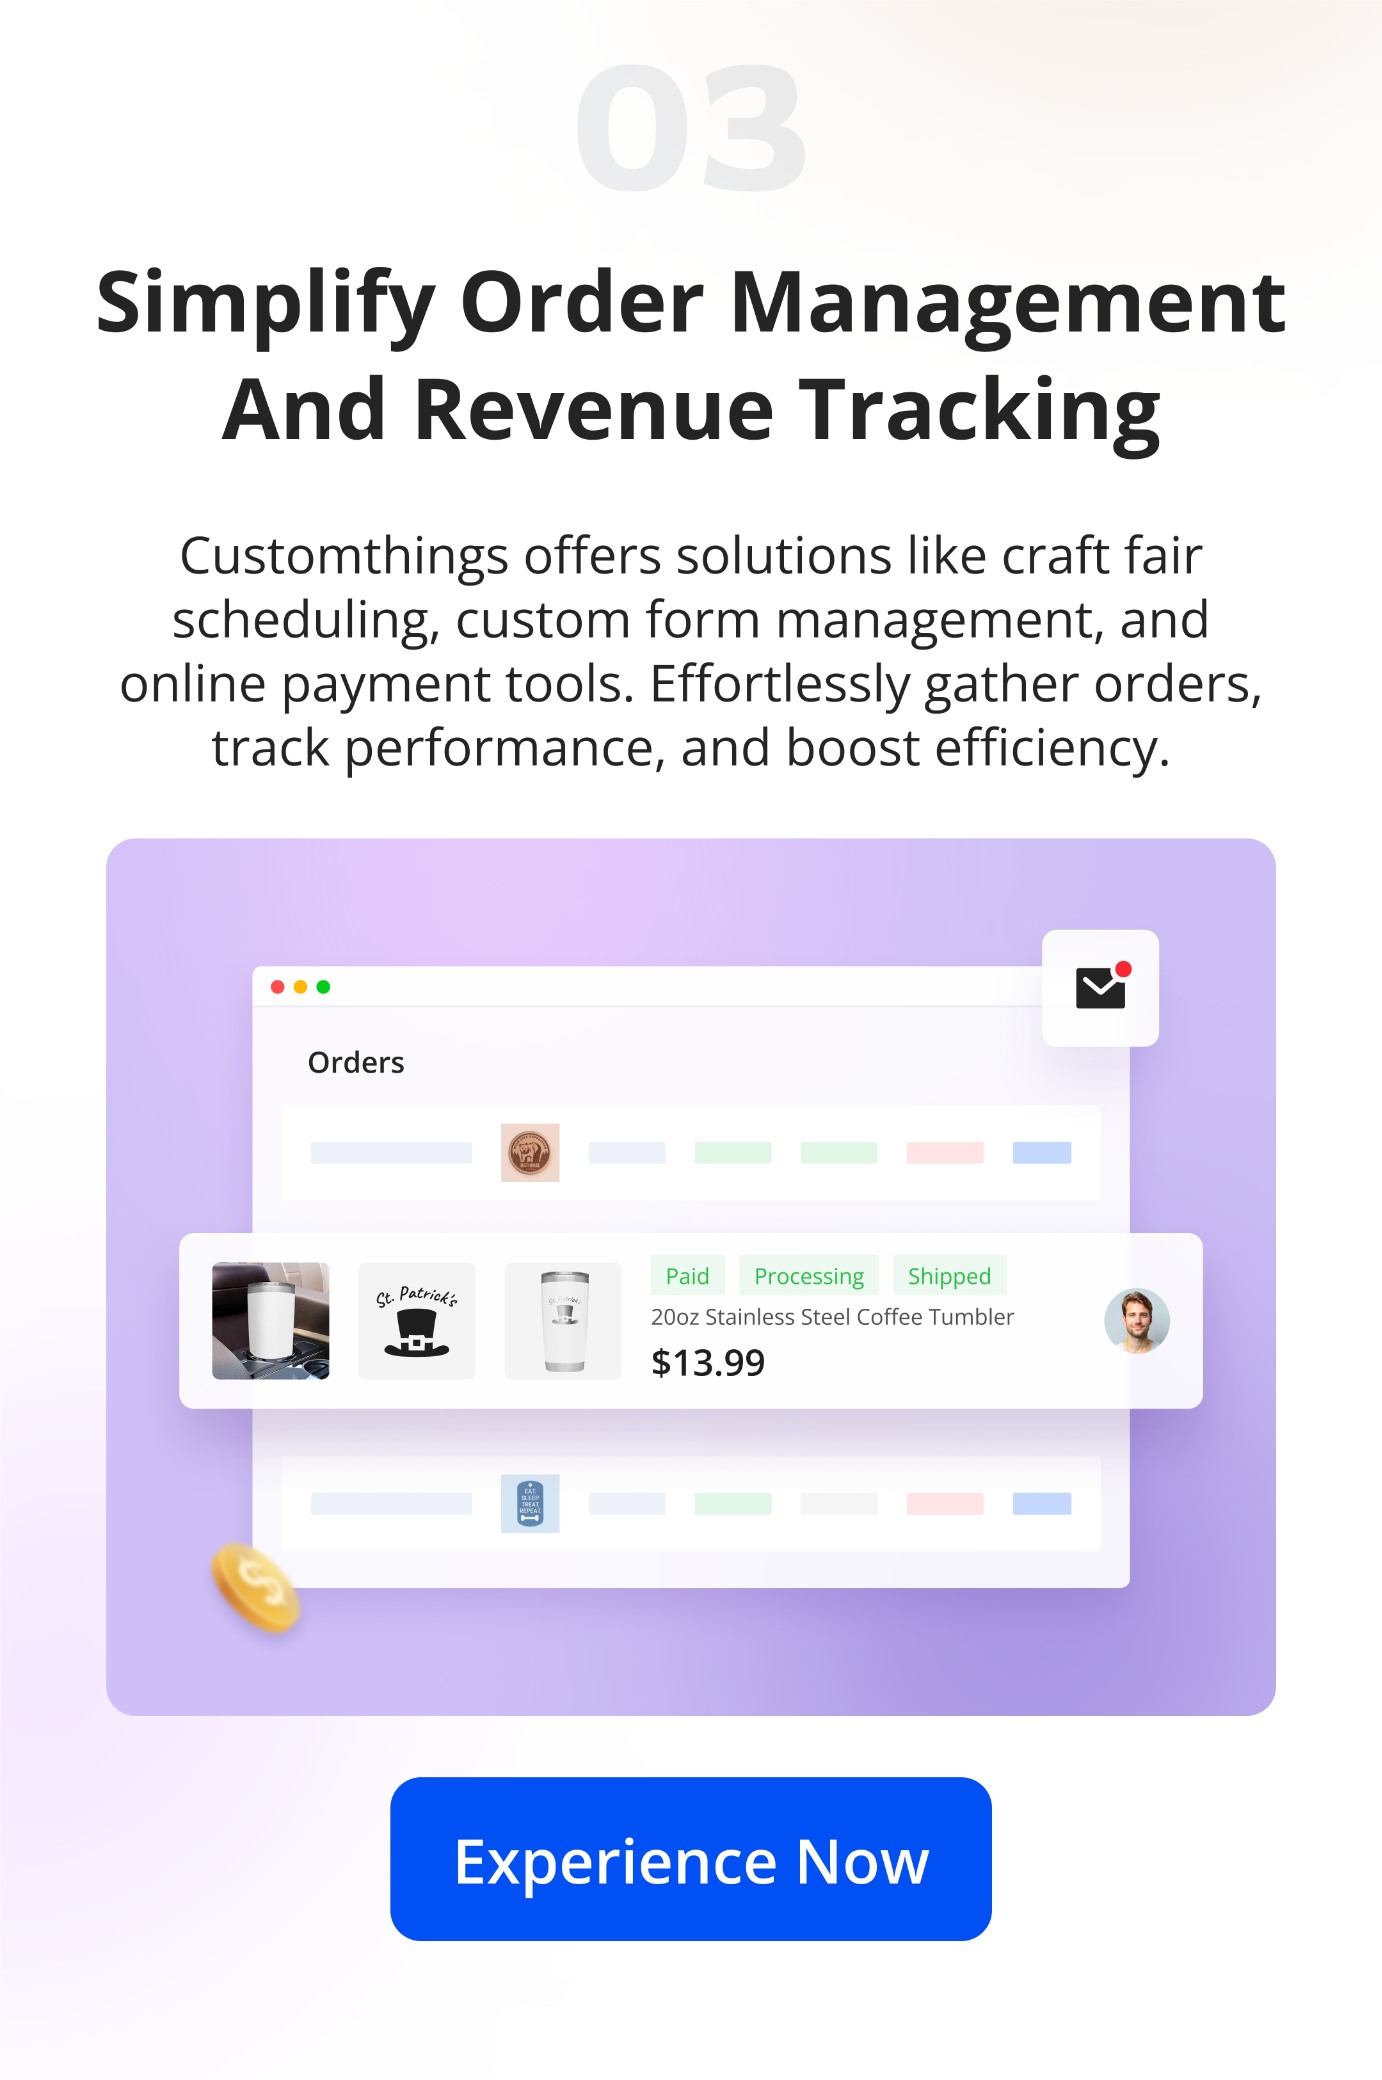 Simplify Order Management and Revenue Tracking